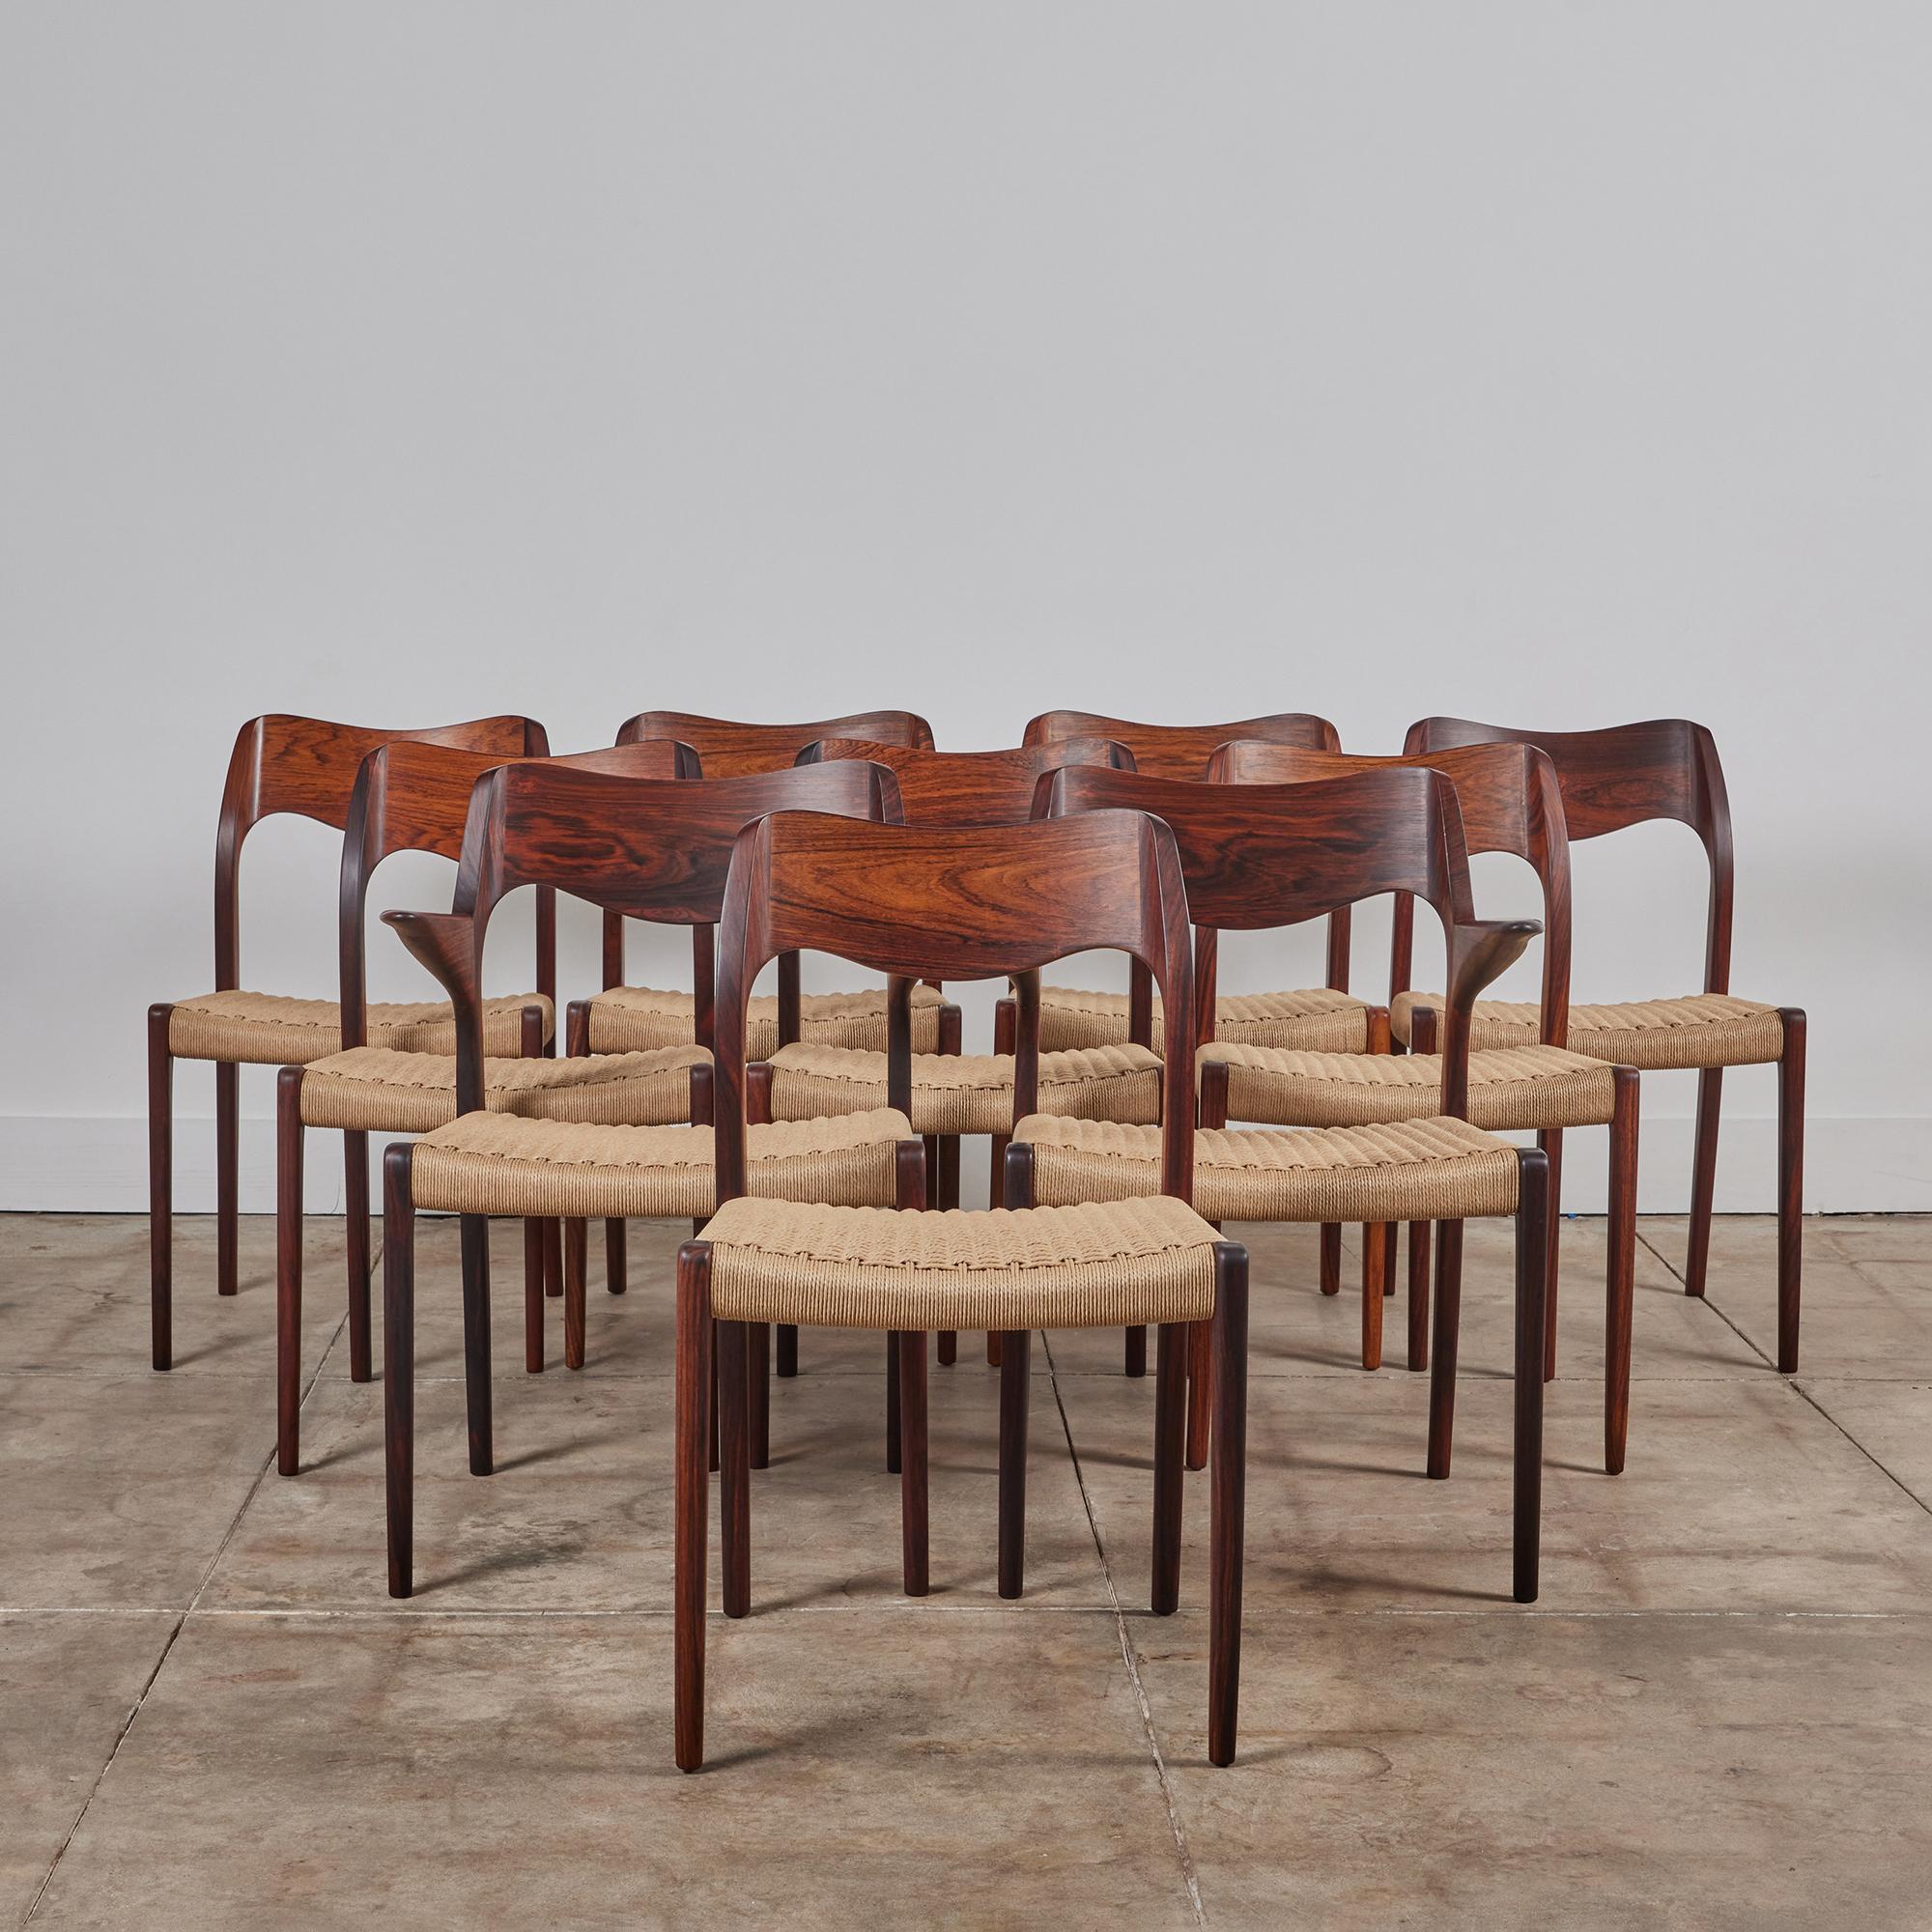 Set of ten Niels Møller Model No. 71 and No. 75 dining chairs in solid rosewood with Danish paper cord seats. Designed in 1951 and produced by J. L. Moller Mobelfabrik. The chairs feature a solid wood frame that is impeccably shaped. Møller often